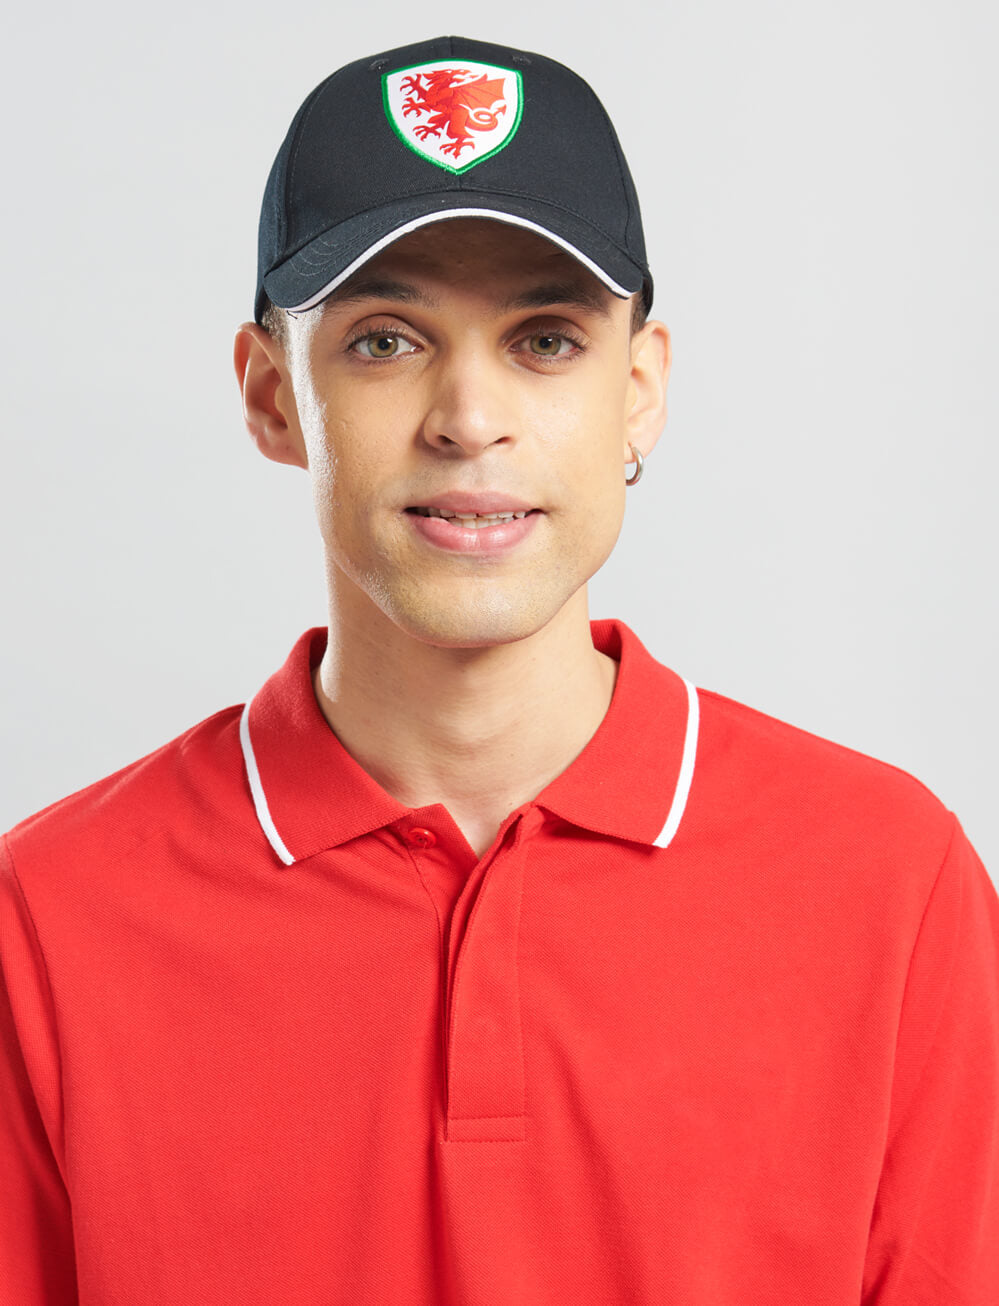 Official Team Wales Cap - Black - The World Football Store